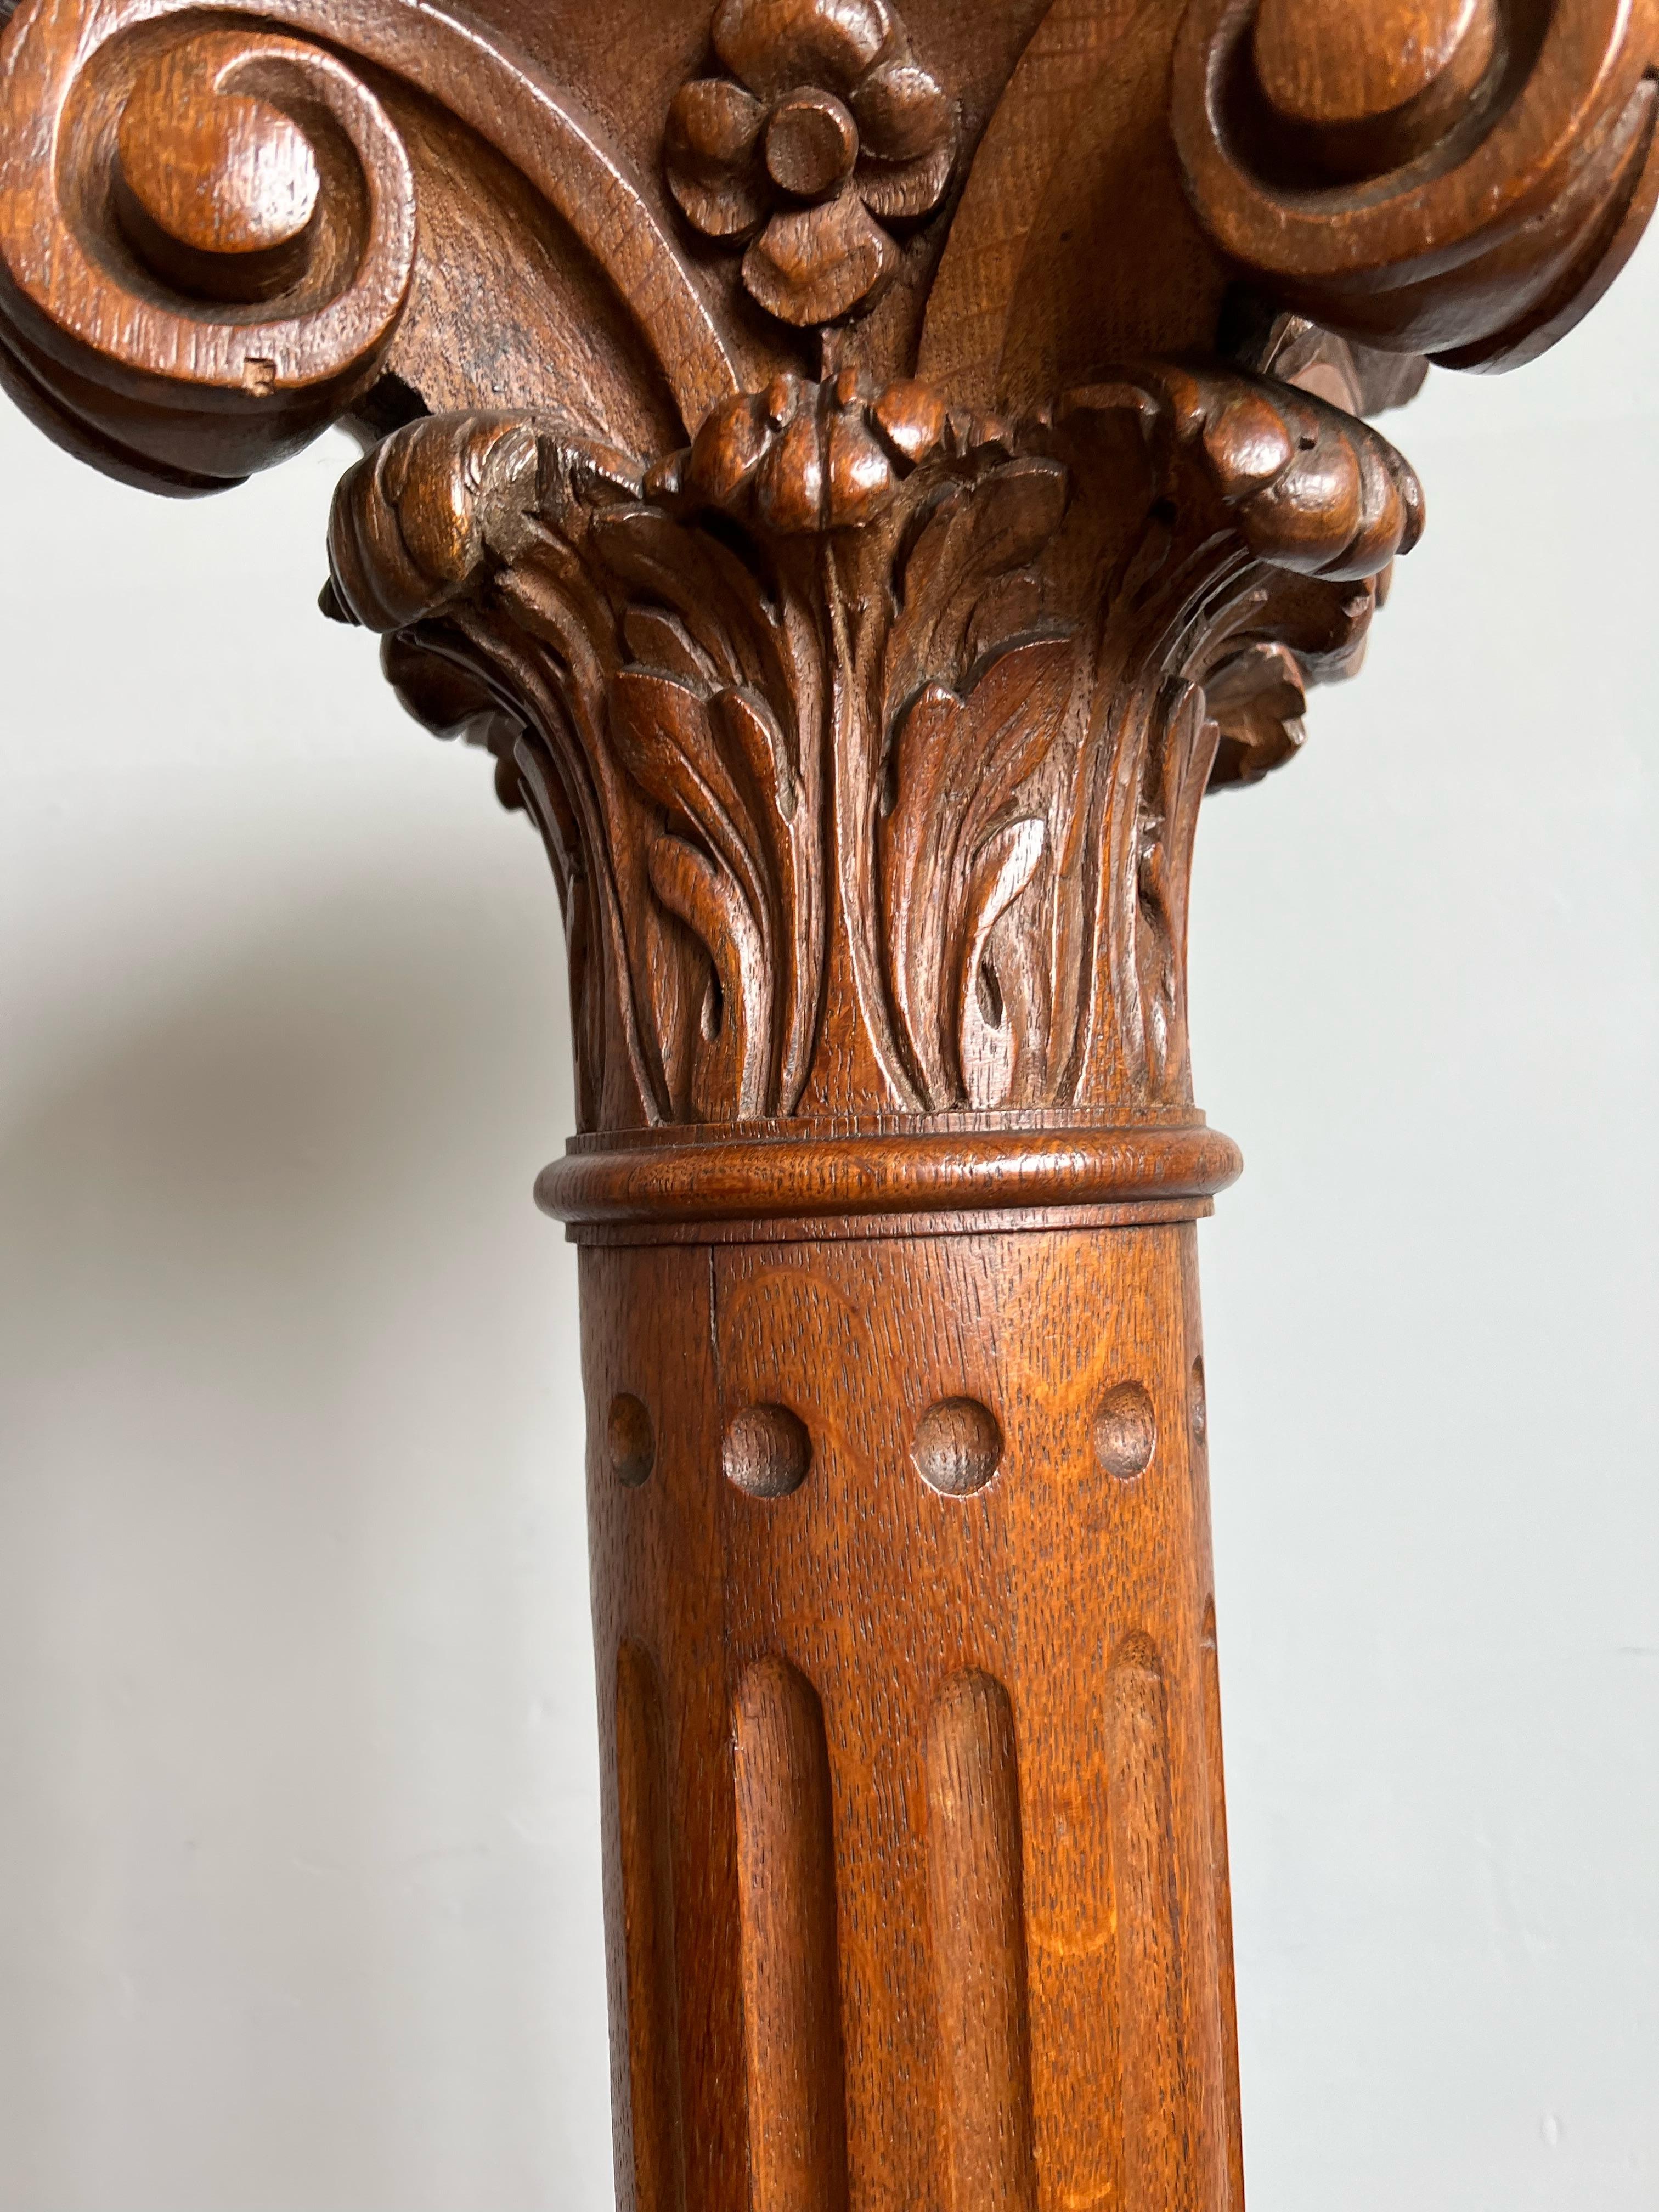 Patinated Antique Early 1900s Majestic Hand Carved Oak Display Sculpture Stand / Pedestal For Sale